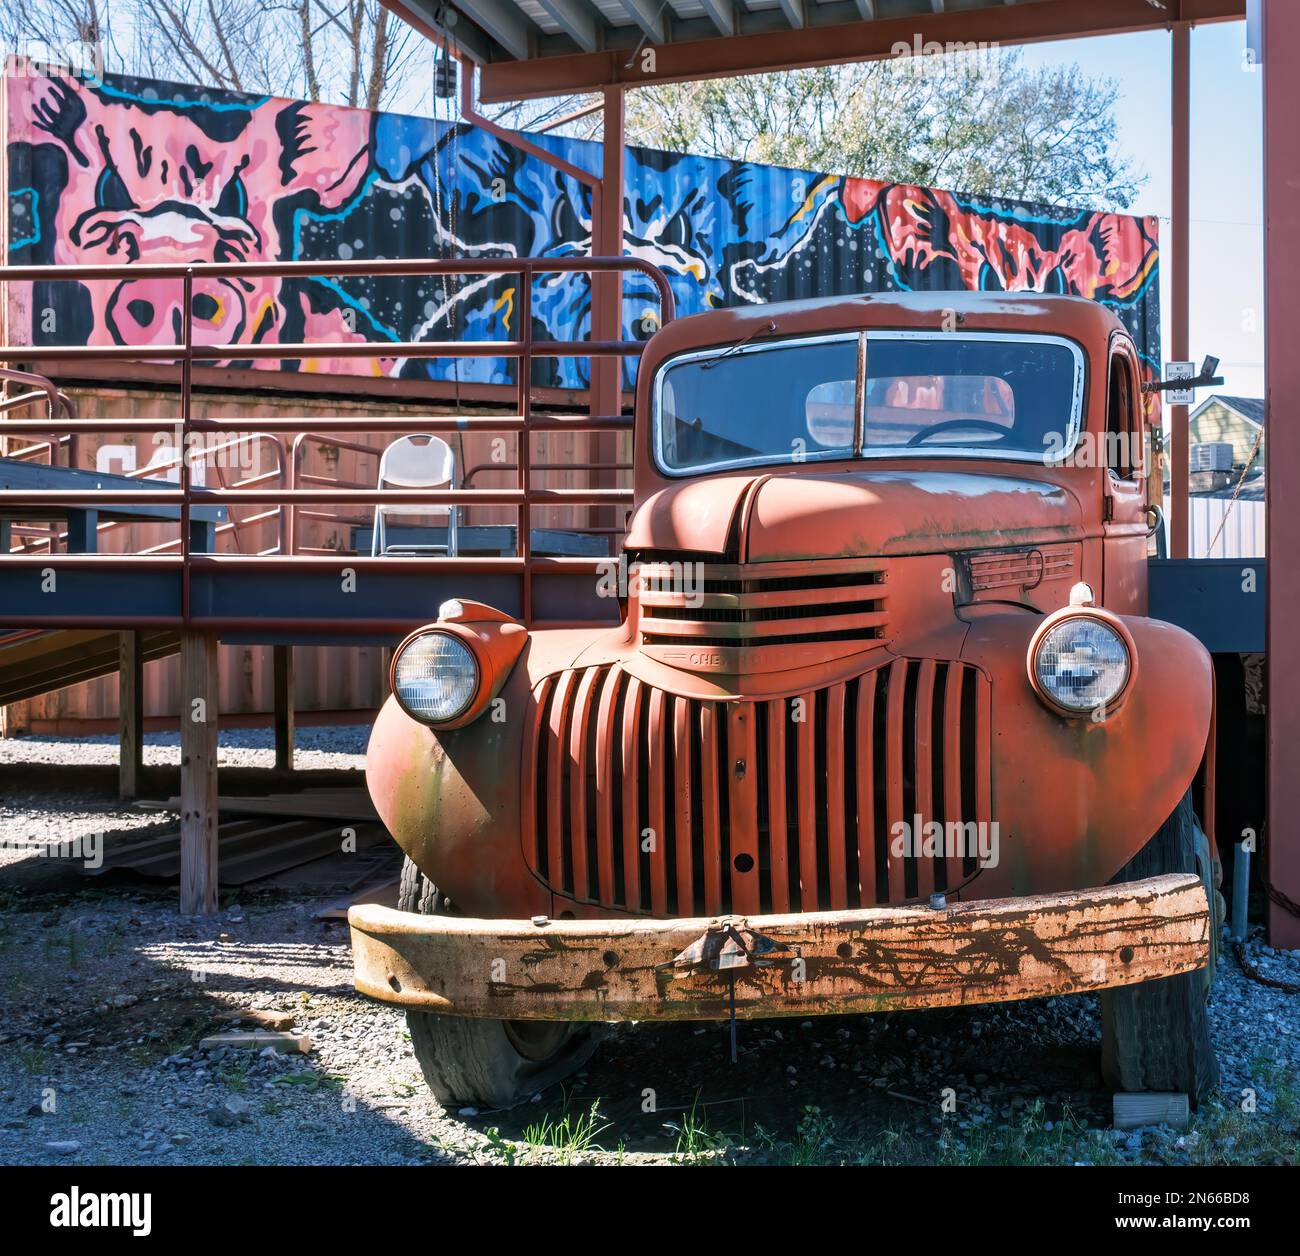 NEW ORLEANS, LA, USA: FEBRUARY 5, 2023: Rusted antique AK series 1940s Chevrolet pickup truck in the stage area of the Central City BBQ restauraunt Stock Photo